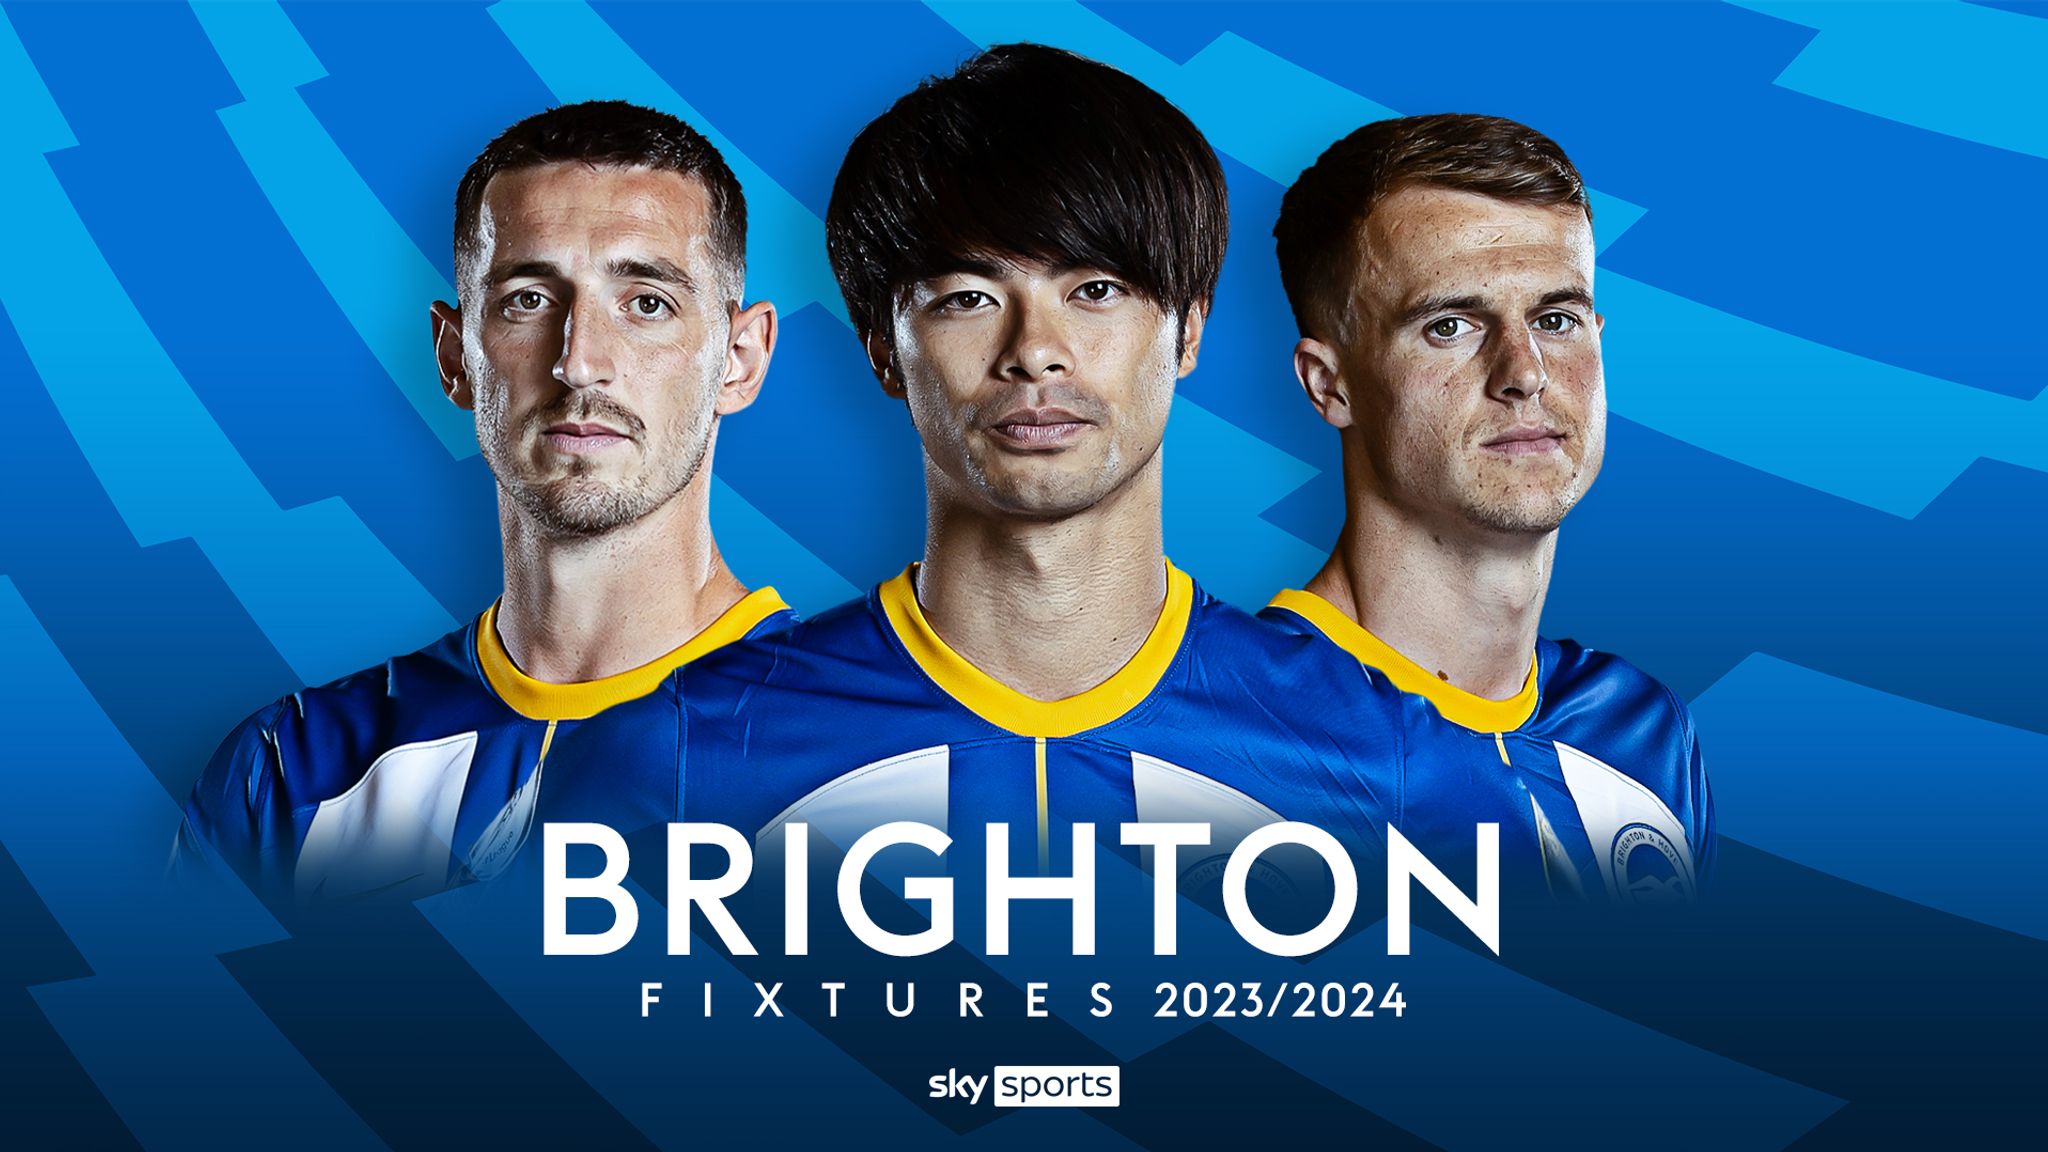 Brighton: Premier League 2023/24 fixtures and schedule | Football News | Sky Sports